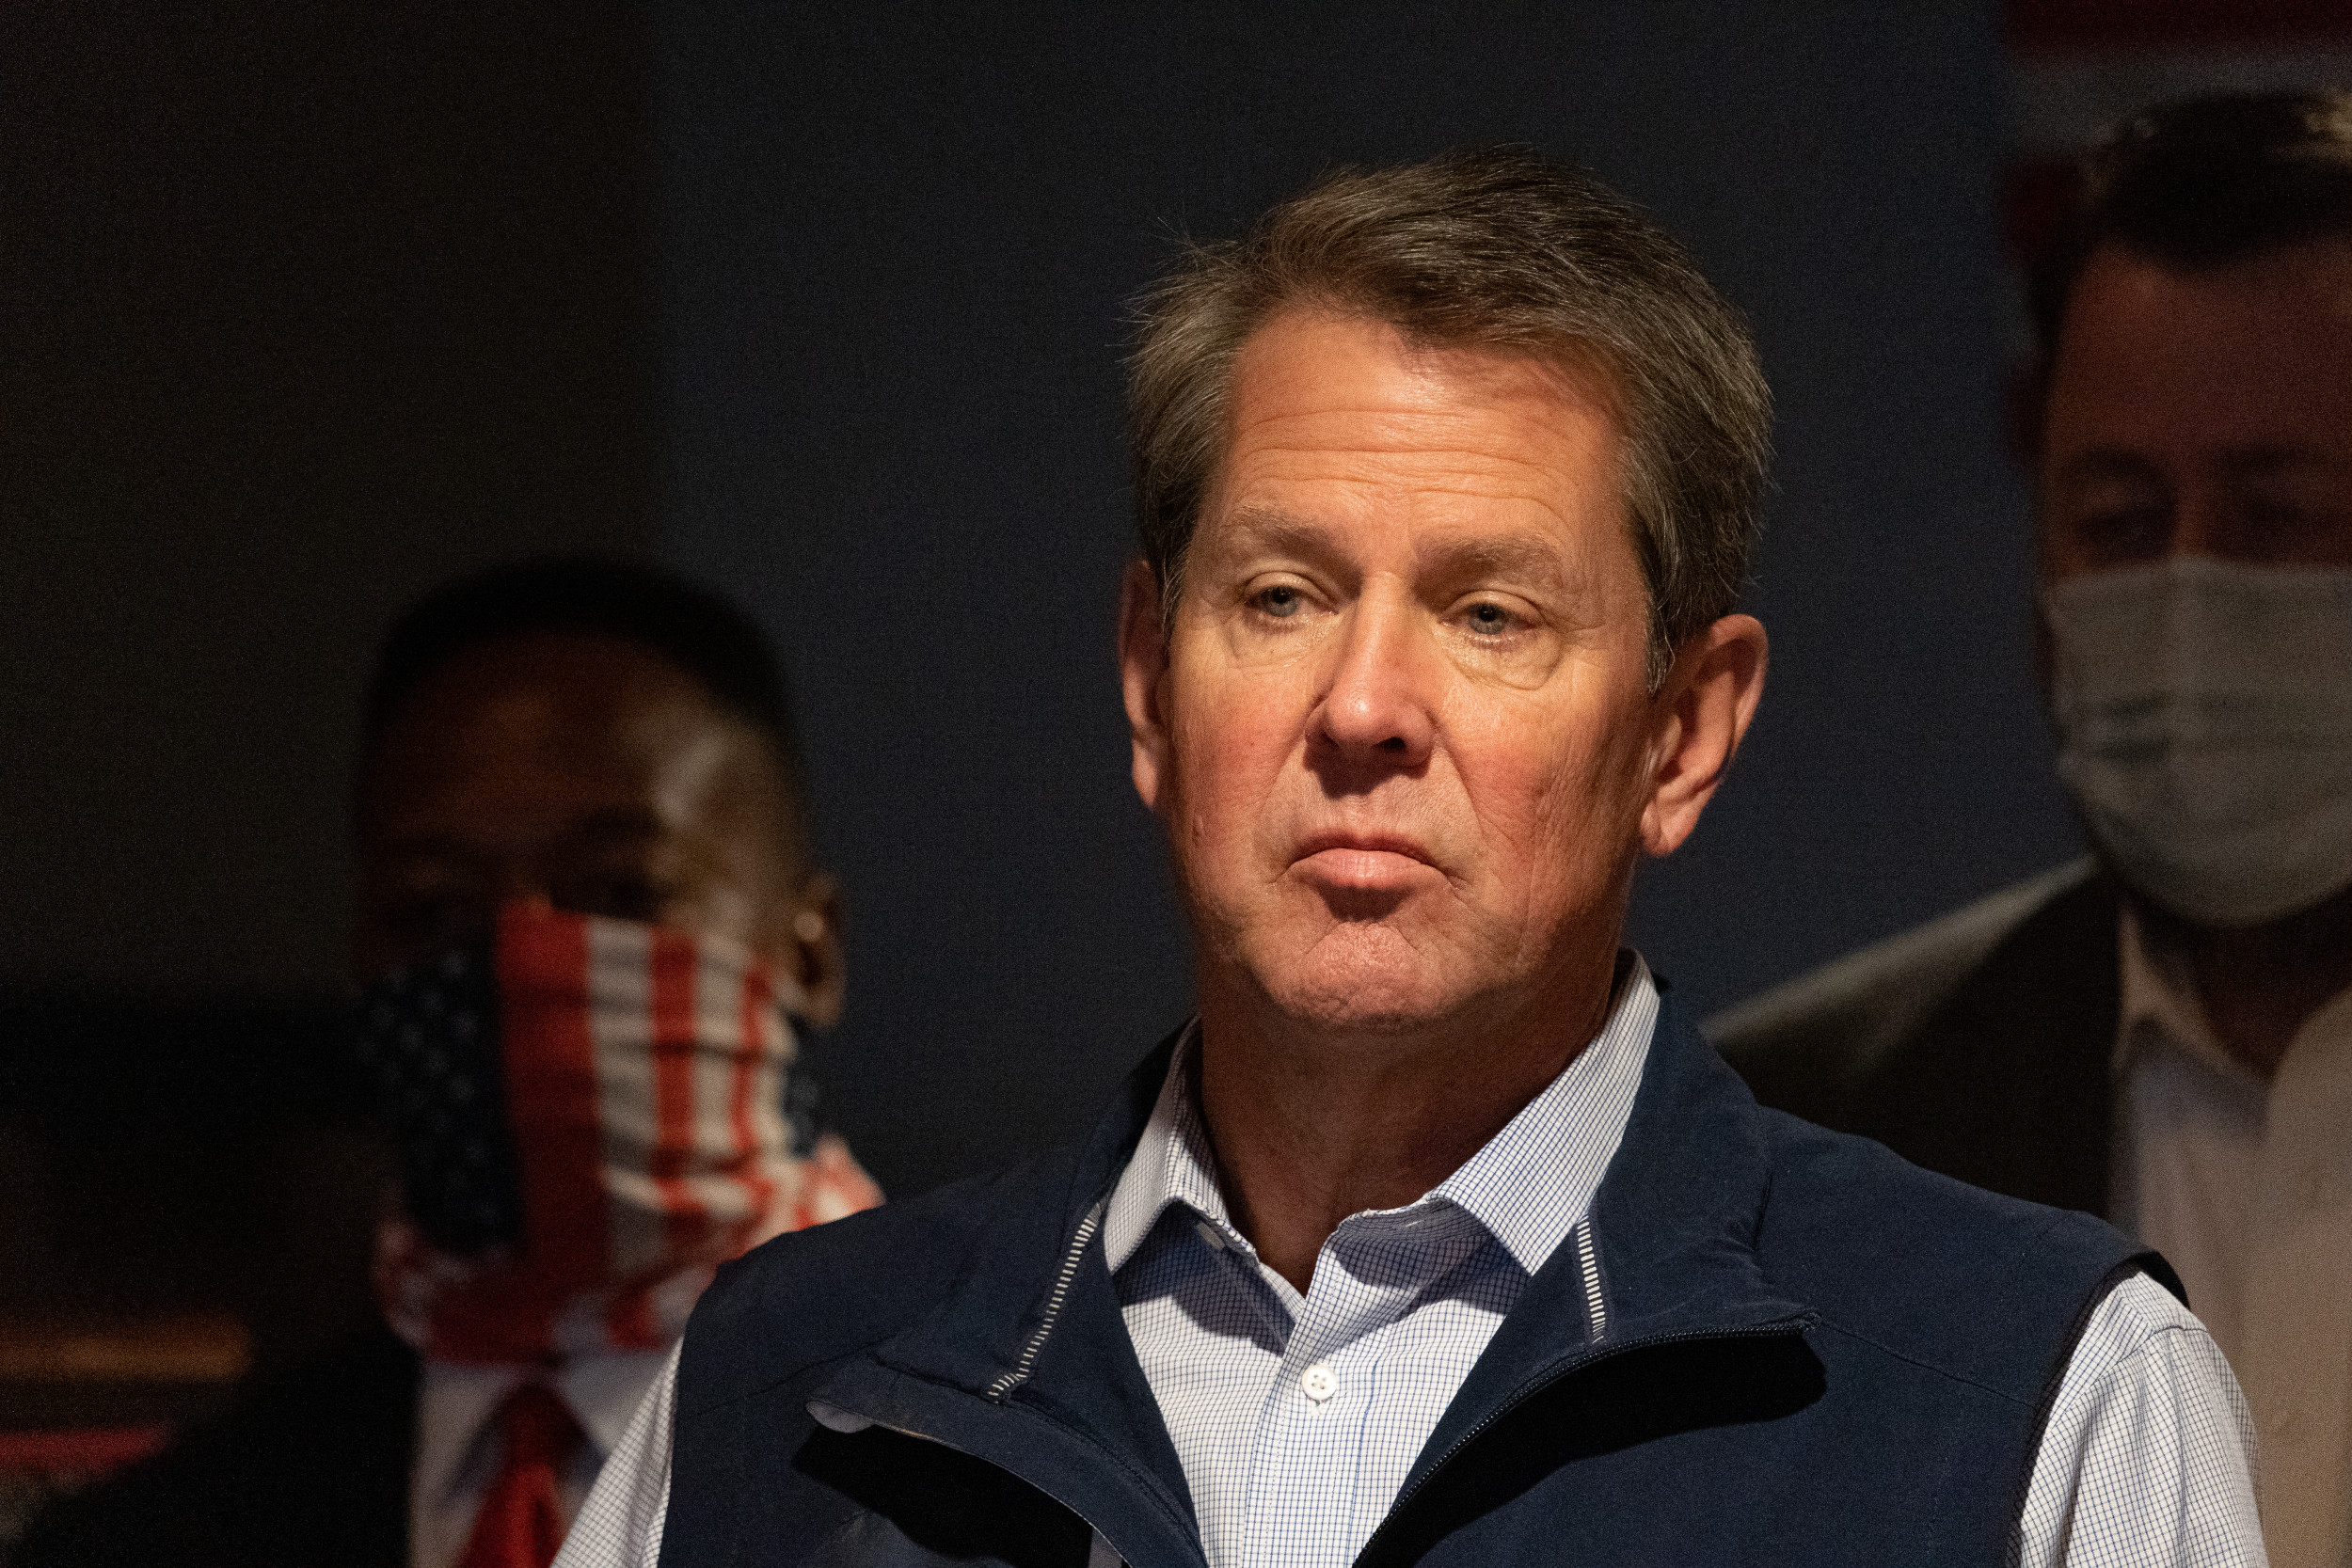 Brian Kemp Wants to Give At Least 250 Tax Rebate With State